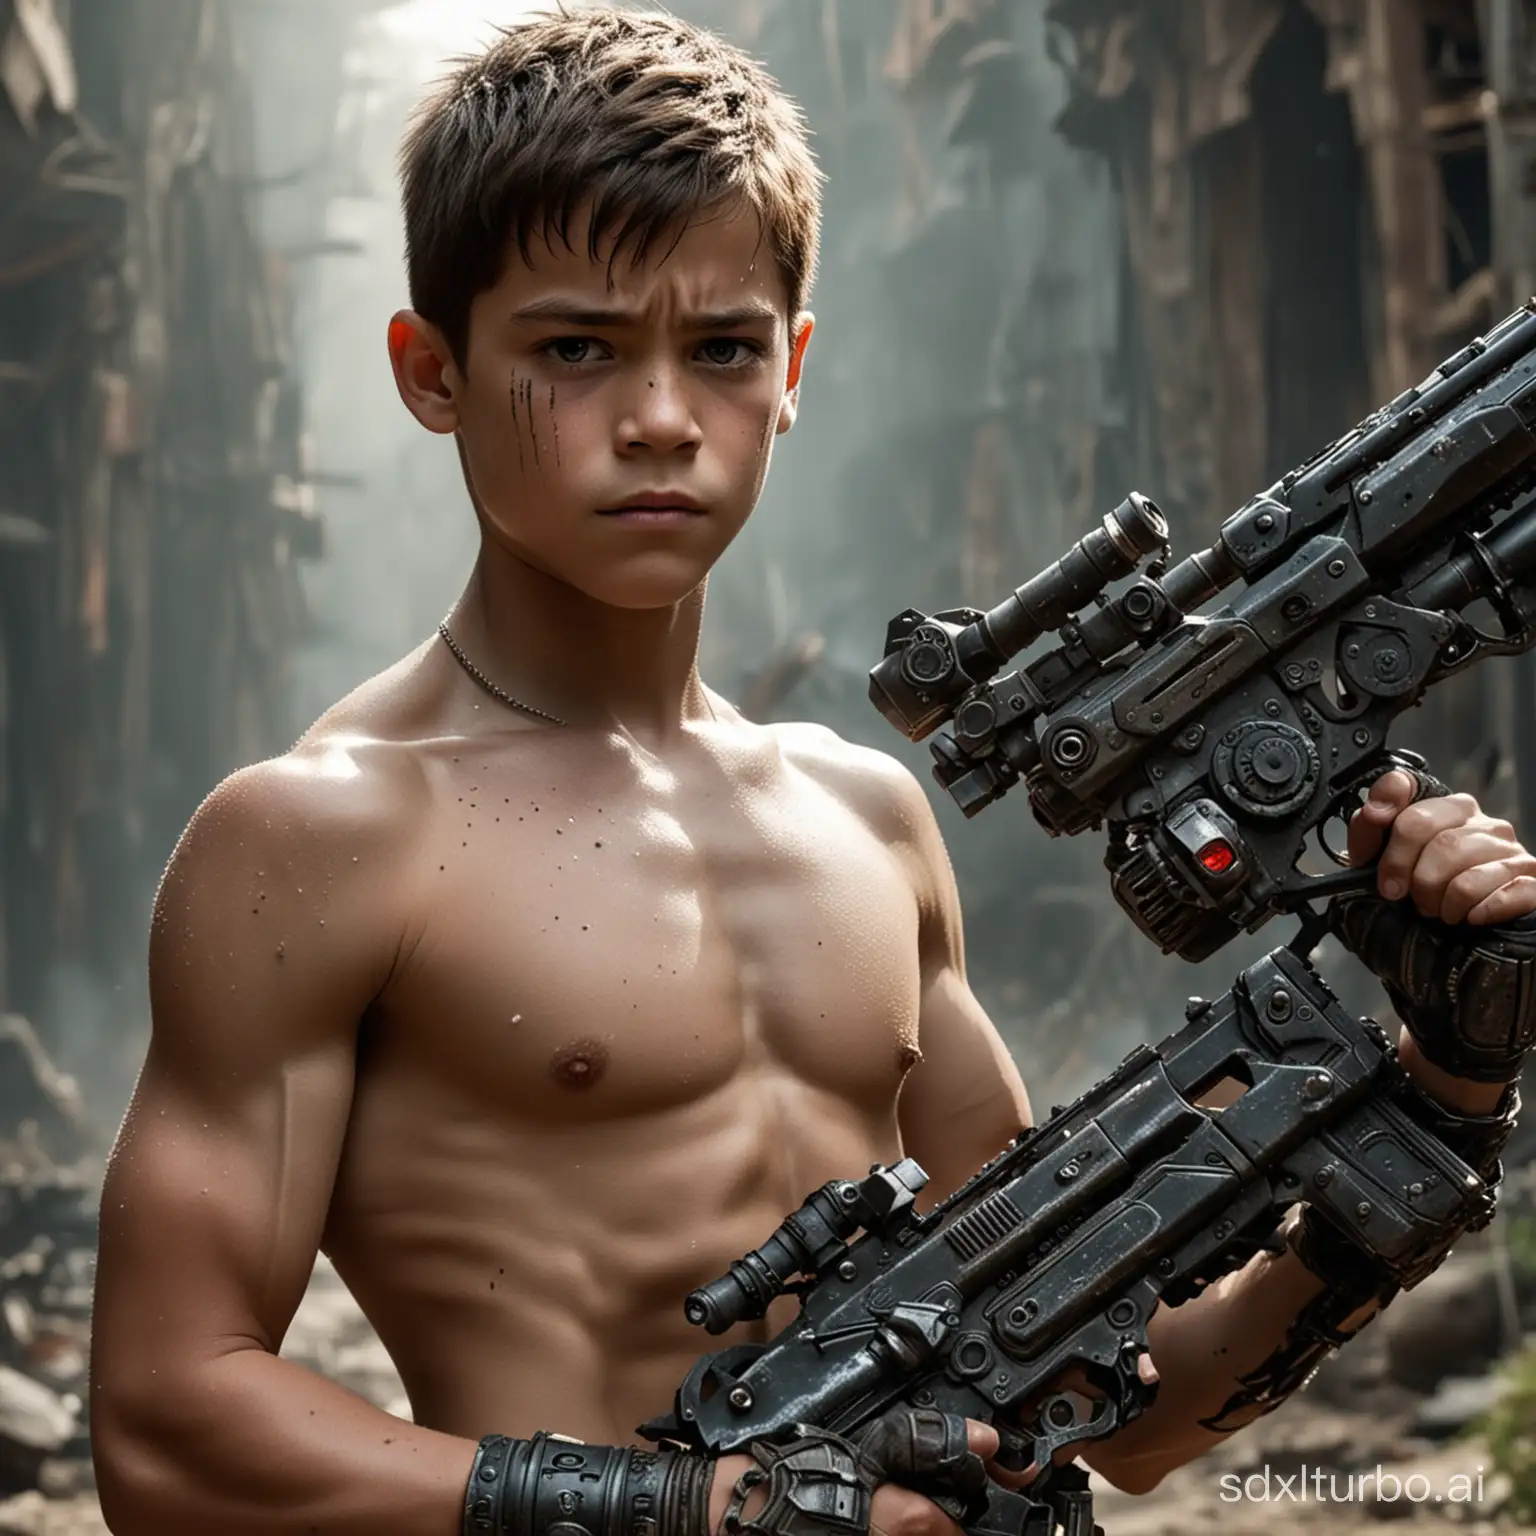 a picture of a muscular shirtless 12  years old bodybuilding huge chest, big muscular arms boy with a gun, preteen, from the tusk movie, still from the movie terminator, movie still of aztec cyborg, in foreground boy with shotgun, still from the movie predator, film still from god of war, movie still of cyborg, unicorn from the tusk movie, movie still of a cyborg, movie still of a cool cyborg, big biceps, big chest, about 1 2 years old, bodybuilding boy, 12 years old kid, shirtless, apocalyptic world, world war 12,desyroyed planet earth, destroyed dark world